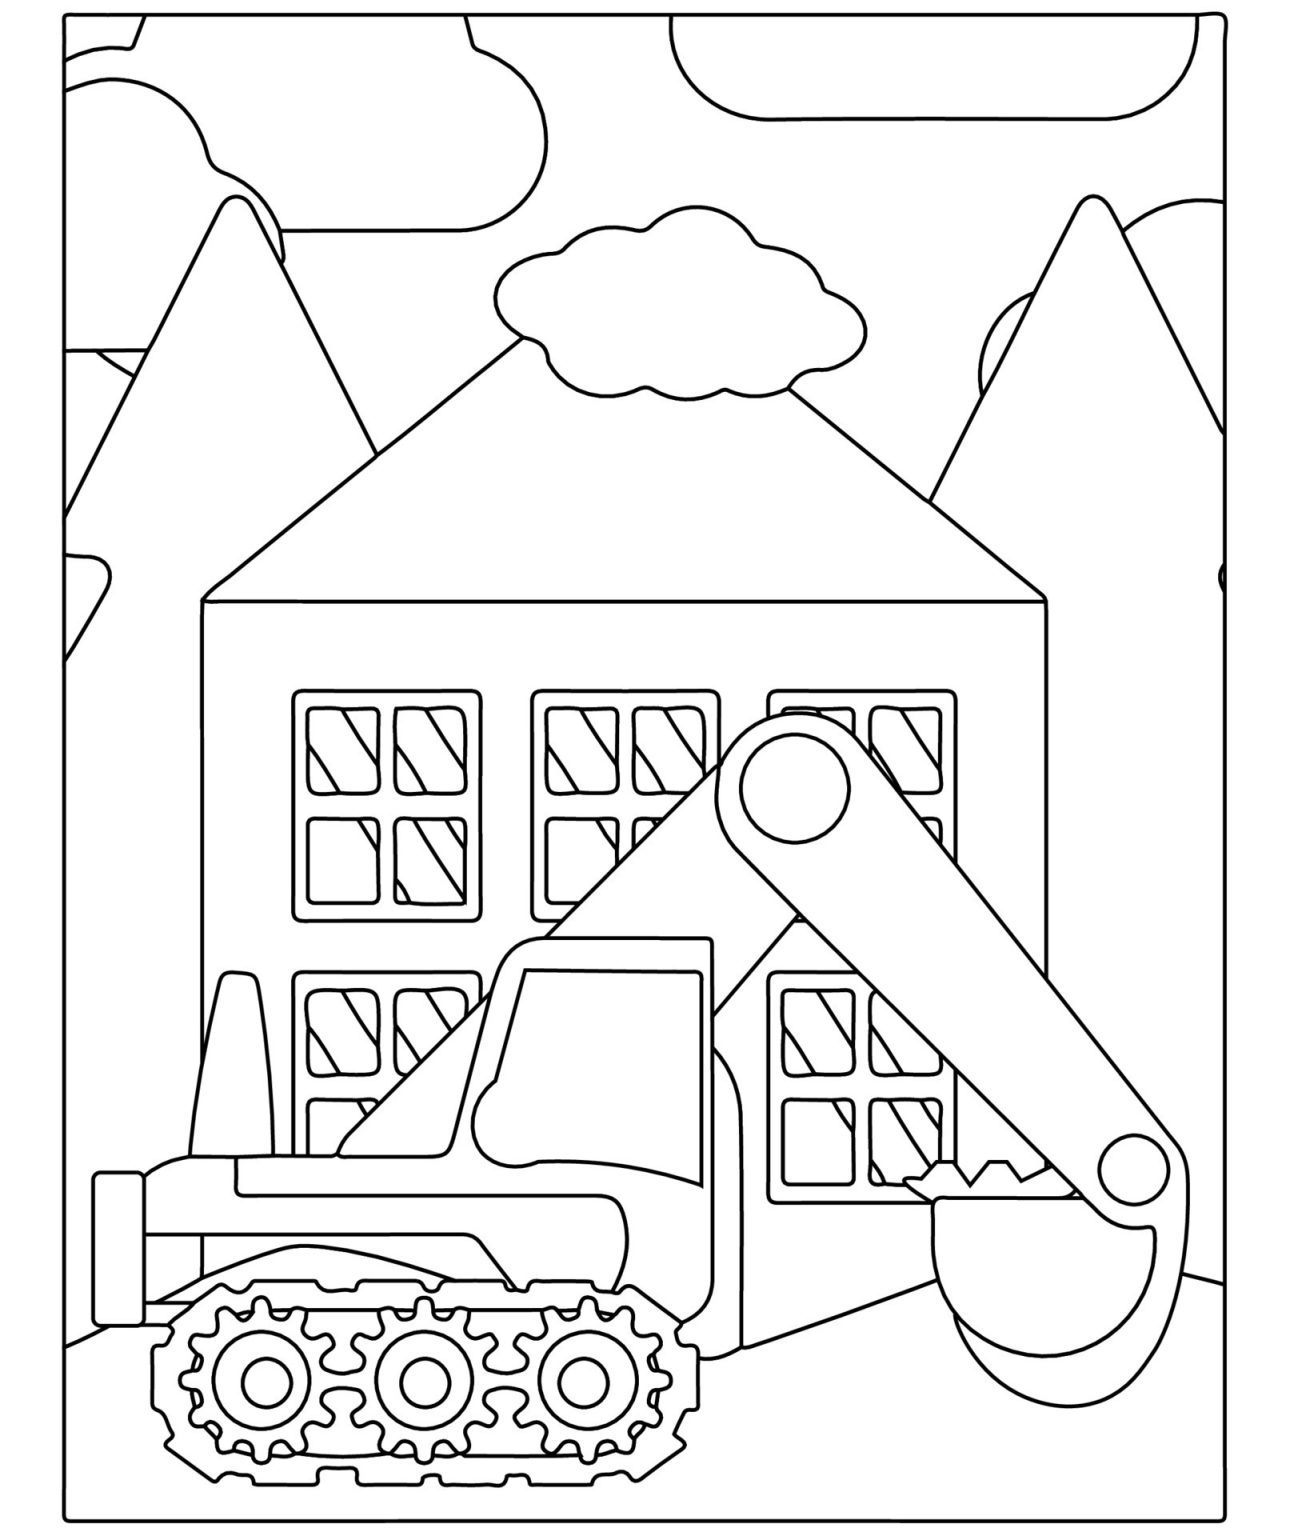 construction-coloring-pages-printable-free-easy-gbcoloring